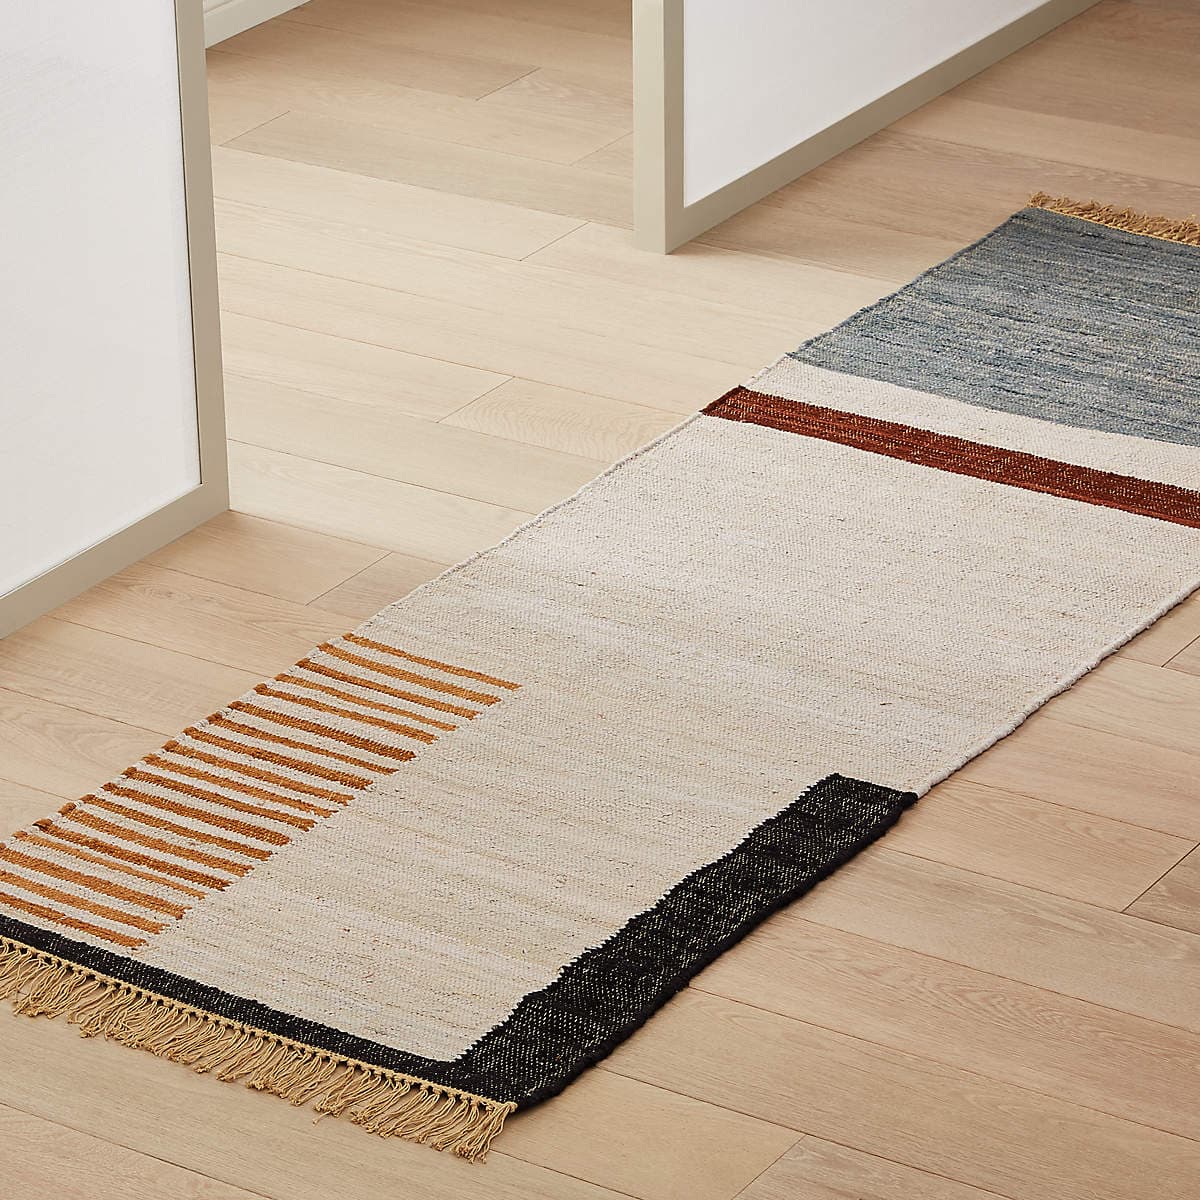 For an Earthy Look, Try This Recycled Cotton Runner